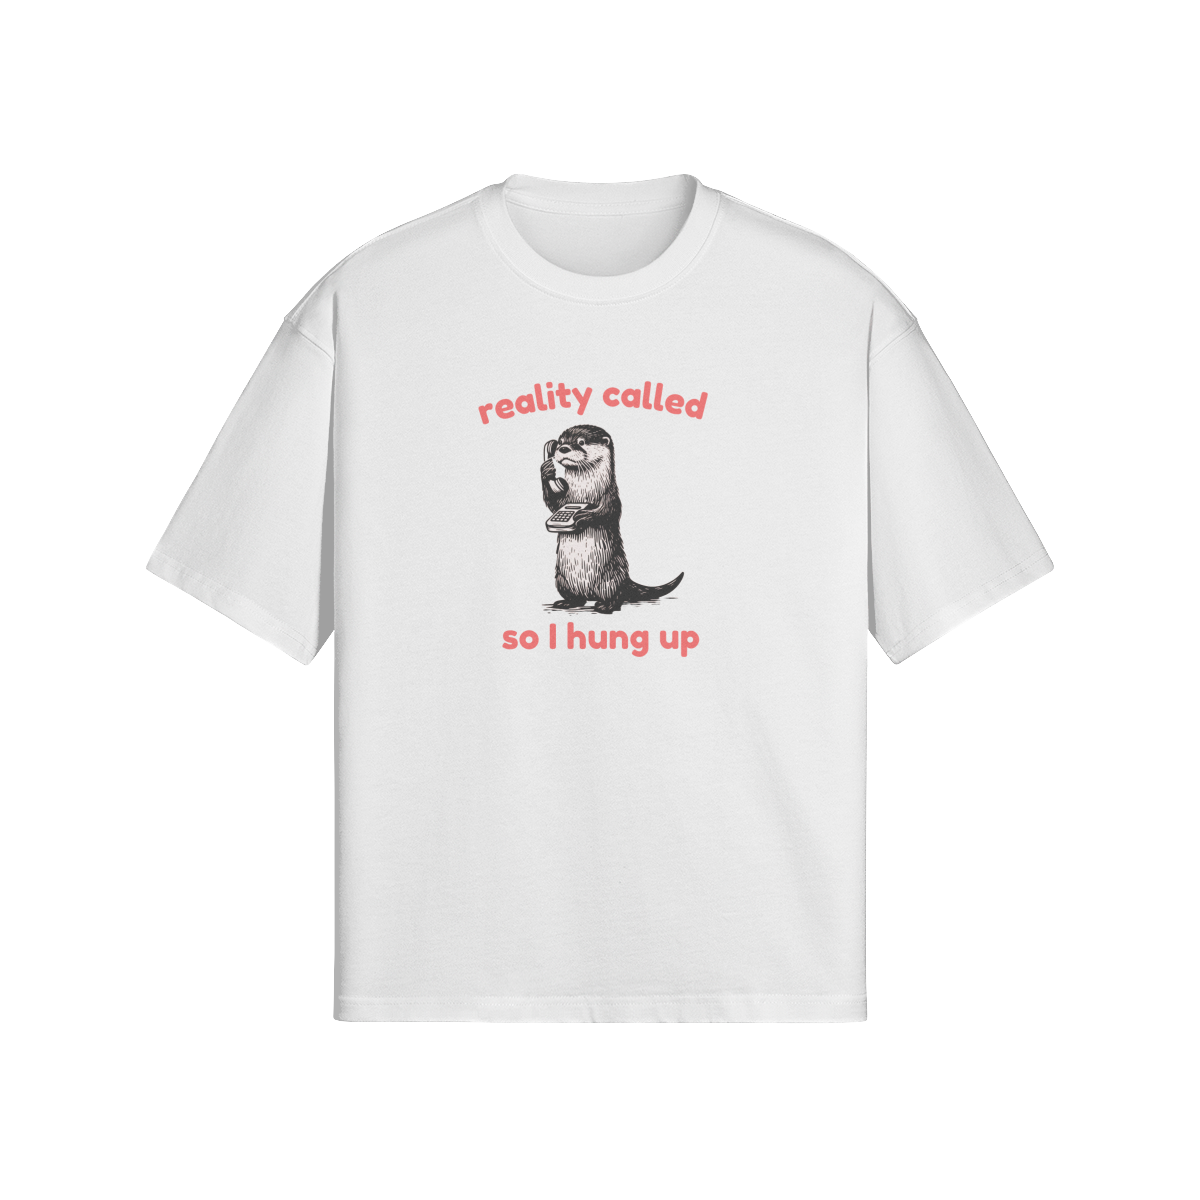 Born To Yap Forced To Zip It Oversized Tee – Otterly Quirky Tees